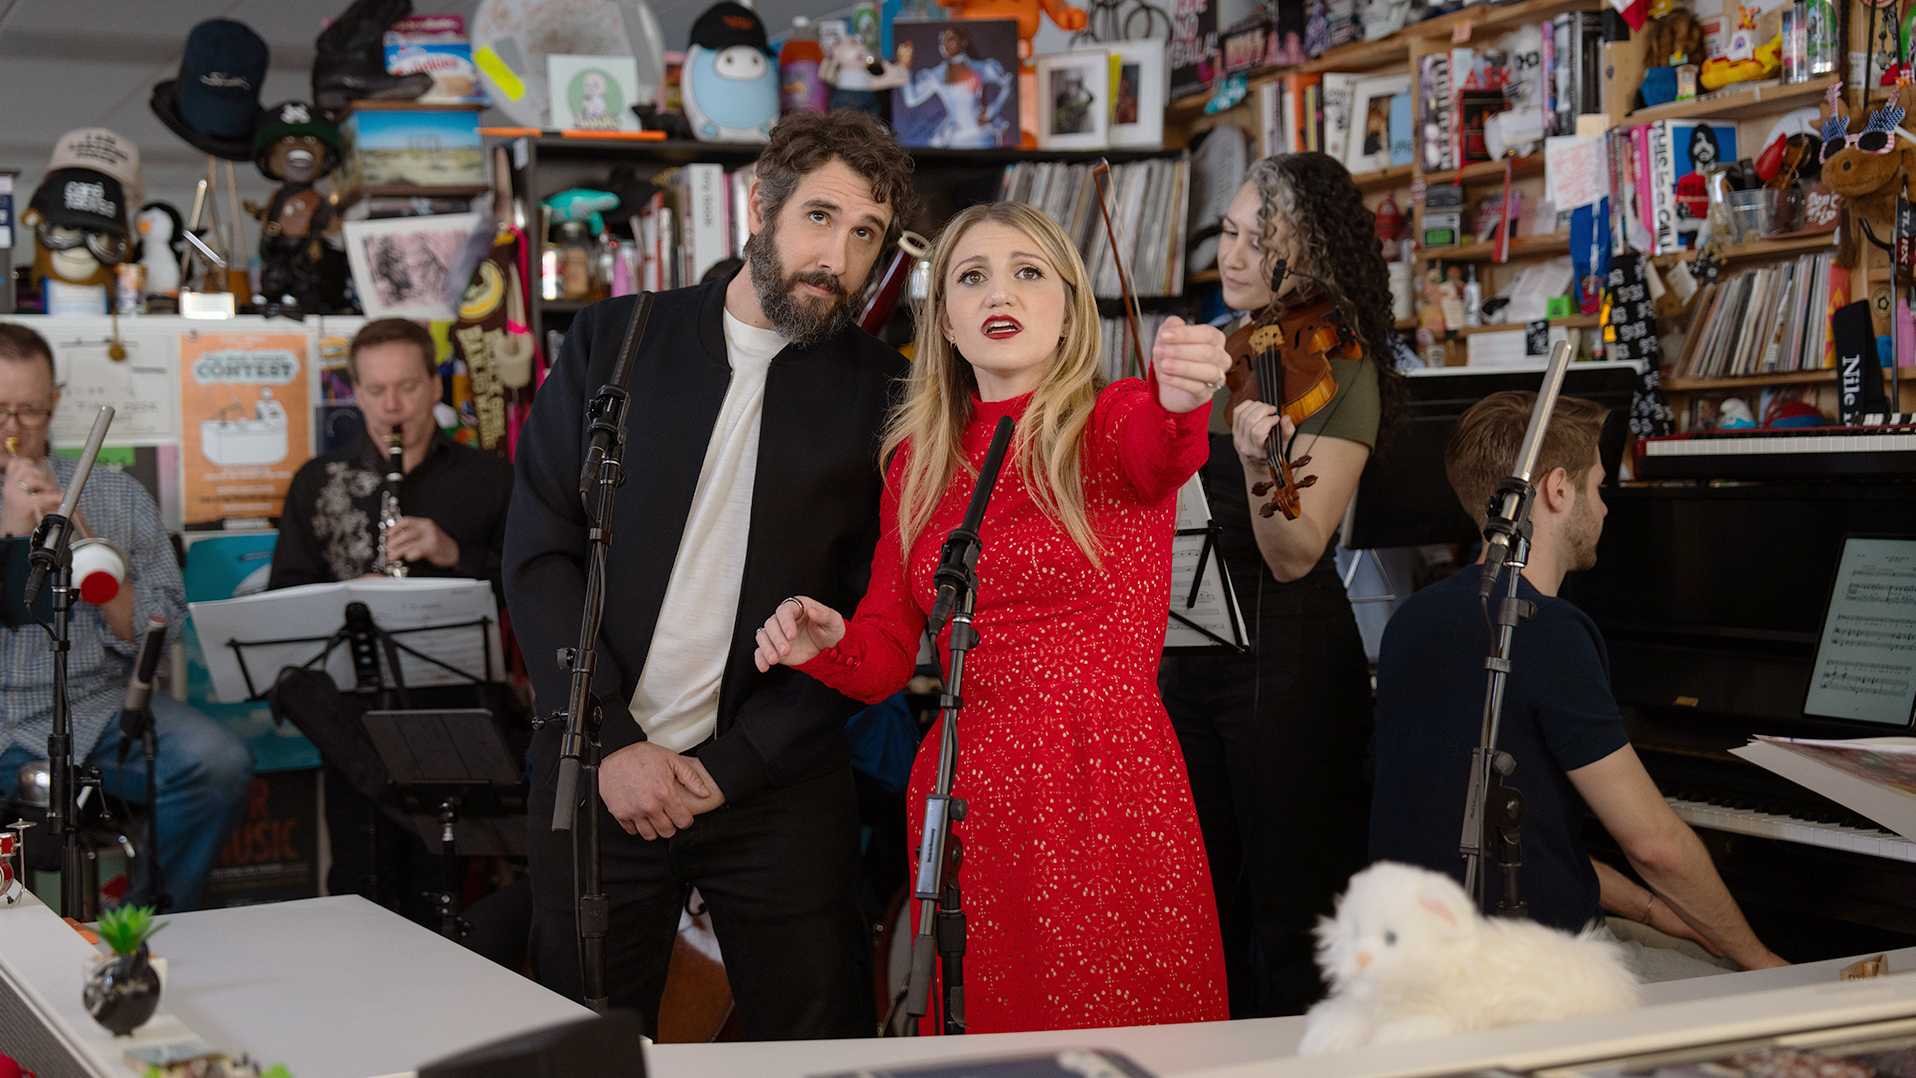 The cast of Sweeney Todd perform a Tiny Desk concert at NPR Music in Washington, D.C.